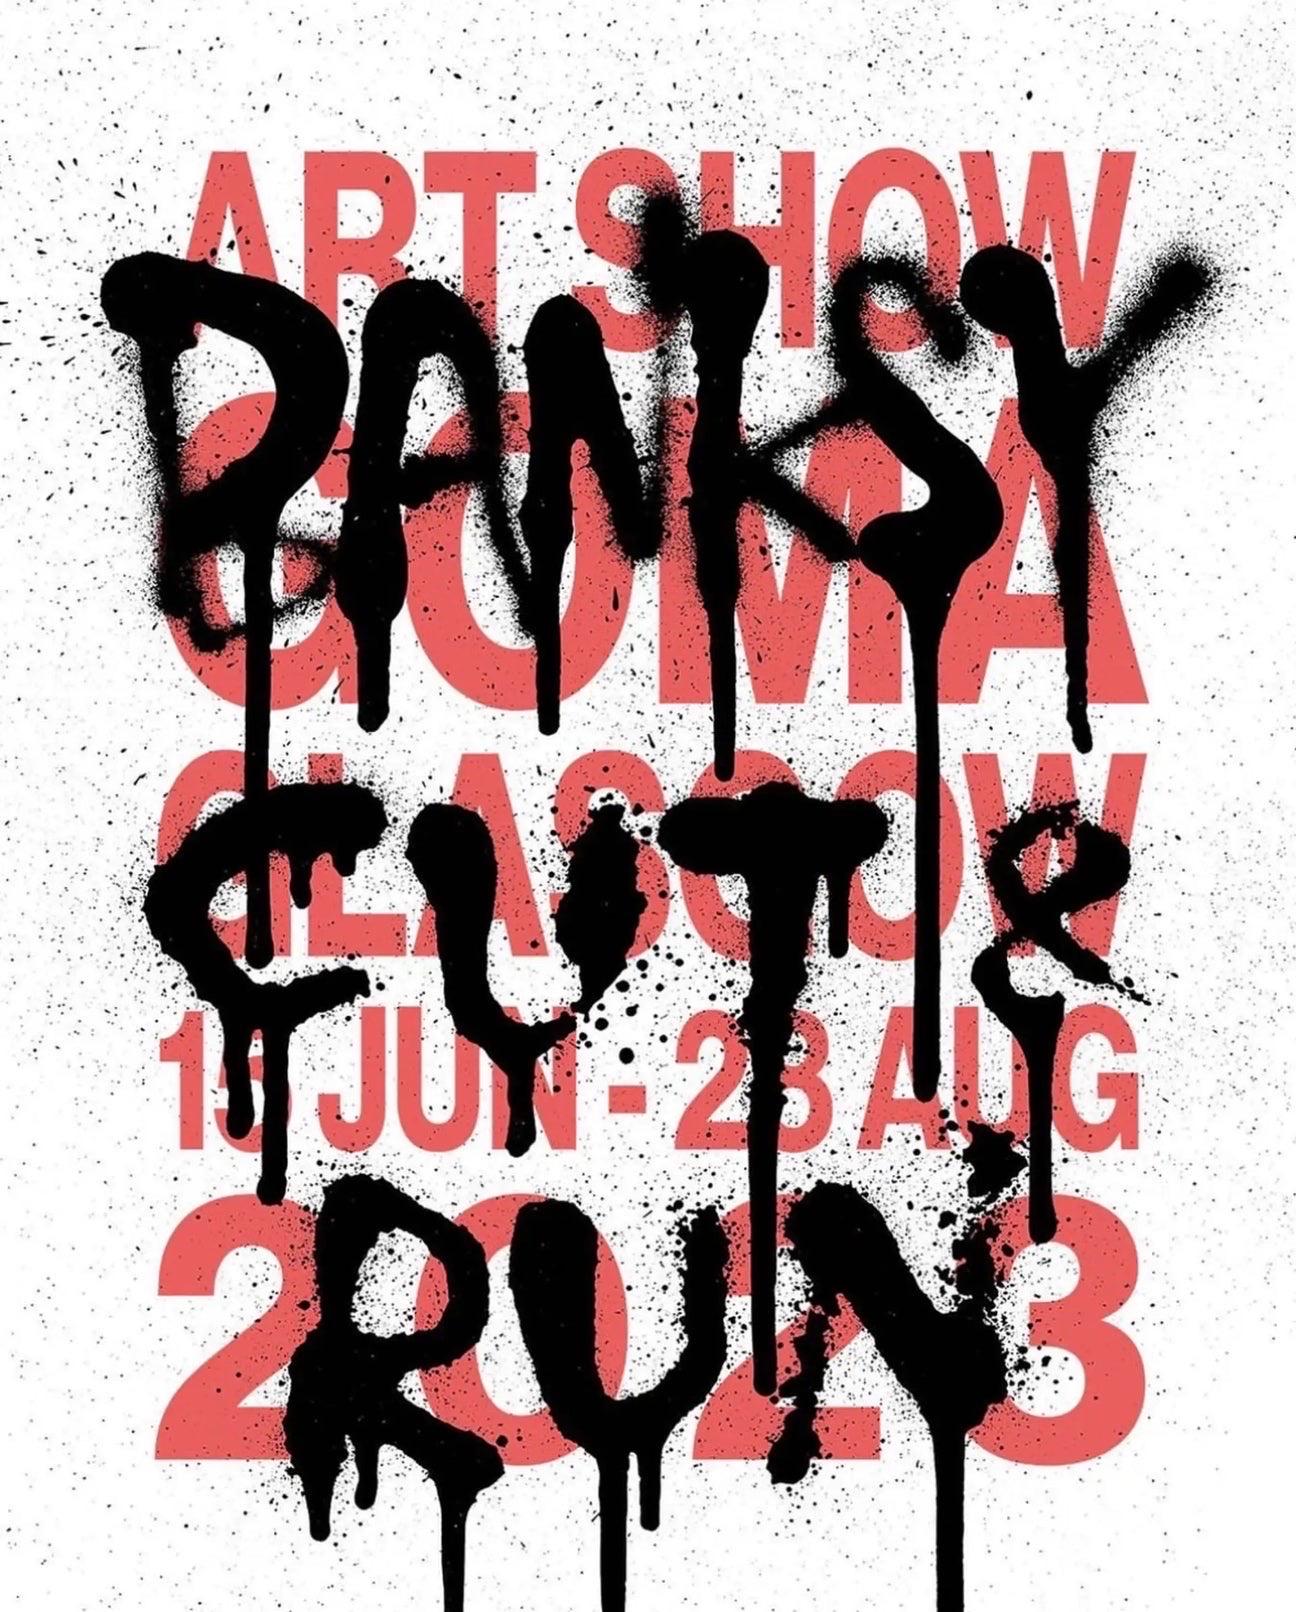 Banksy, Cut and Run Poster set, 2023

Official poster set for 